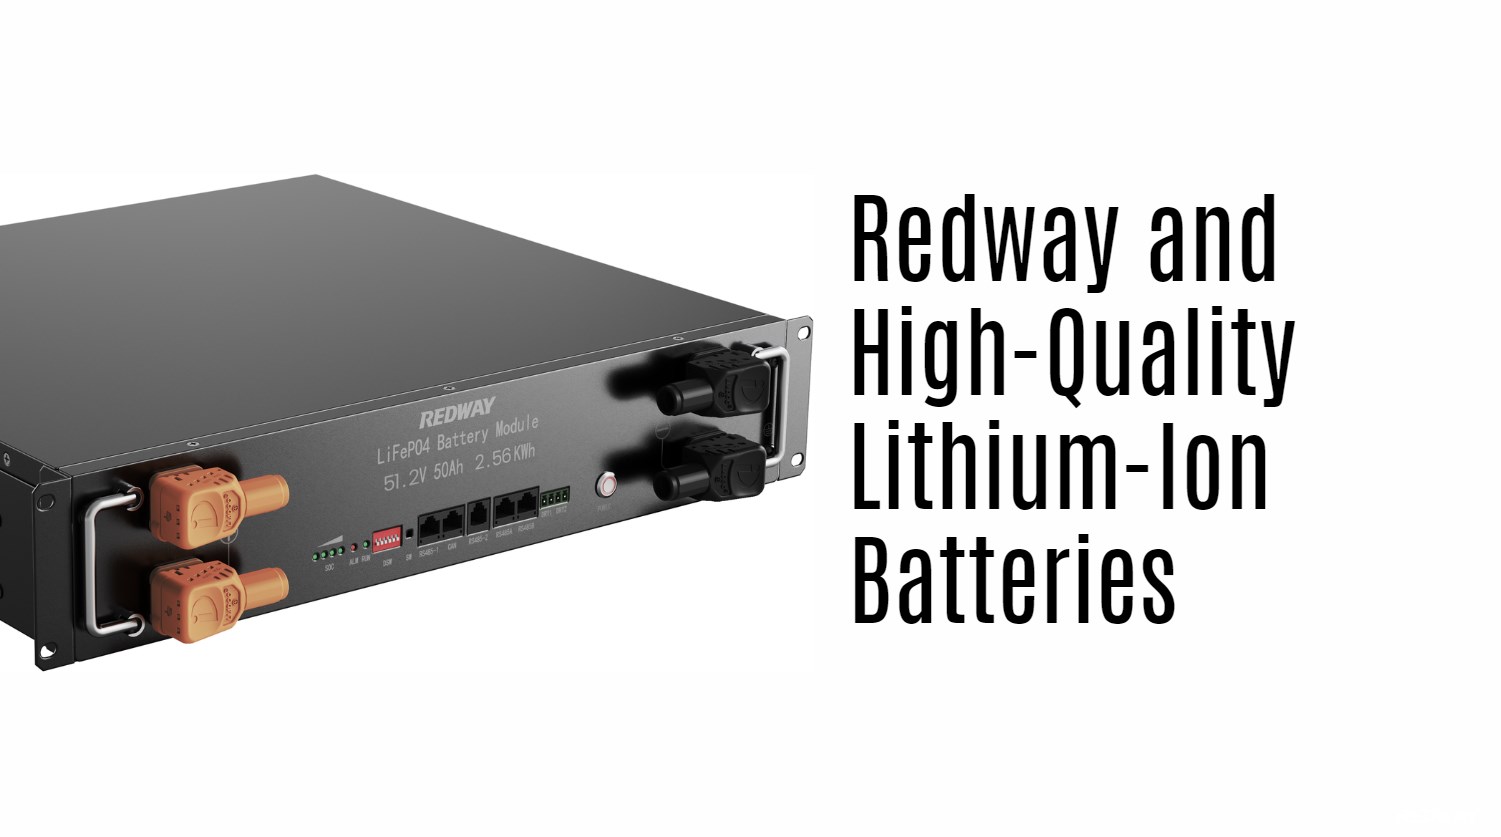 Redway and High-Quality Lithium-Ion Batteries. 51.2v 50ah server rack battery lfp factory oem